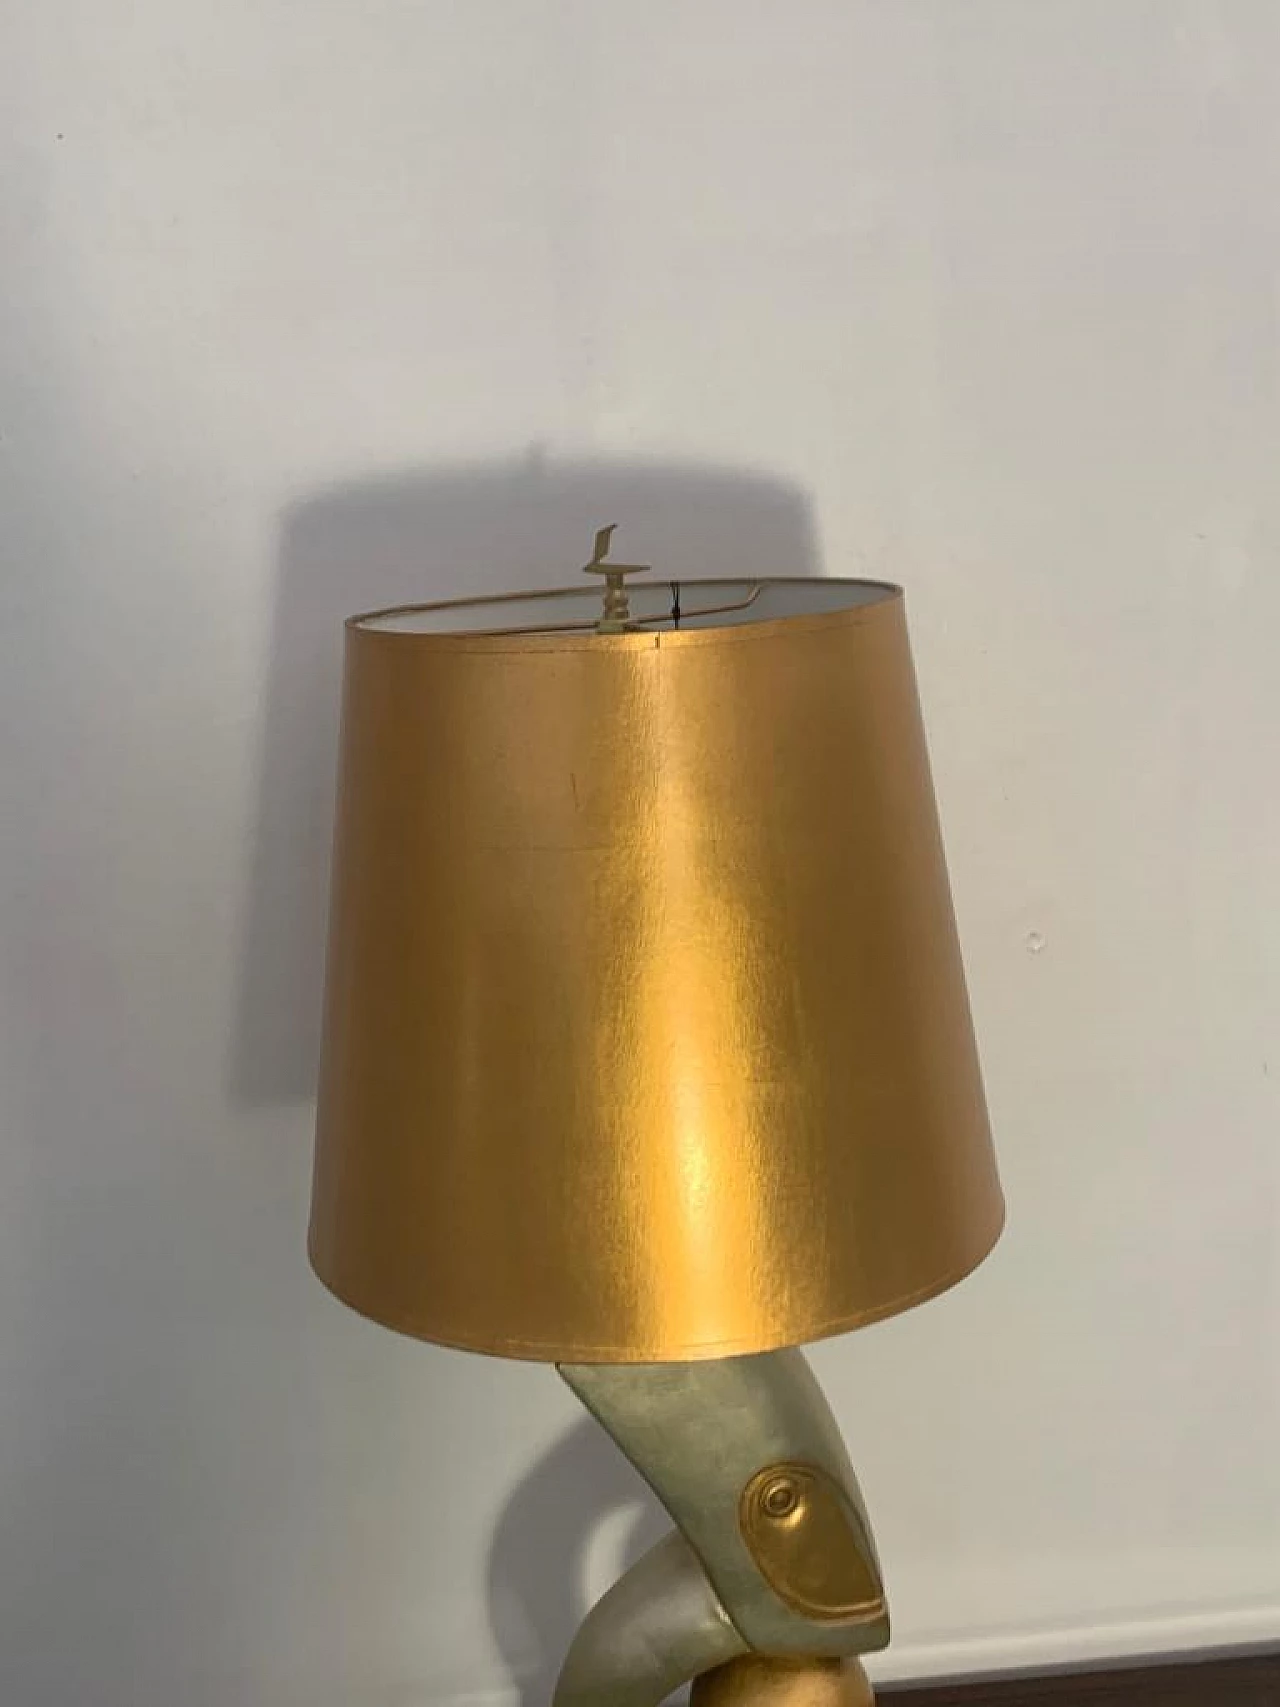 George table lamp by Leeazane for Lam Lee Group Dallas, 1990s 1197678